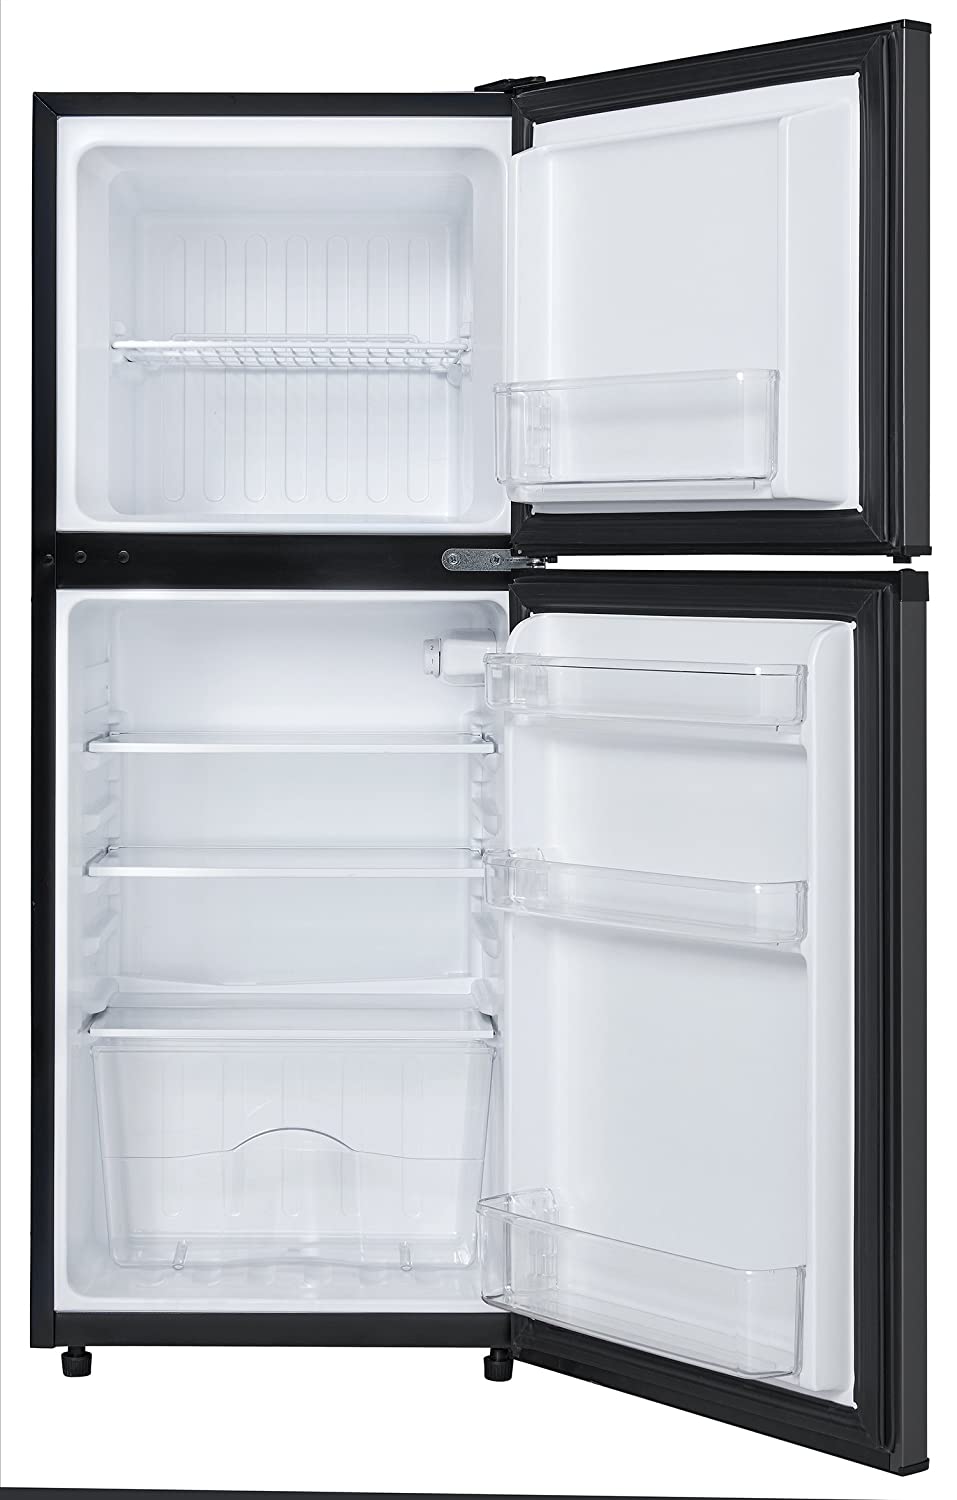 10 BEST APARTMENT/NARROW REFRIGERATOR IN 2021 REVIEW ON AMAZON